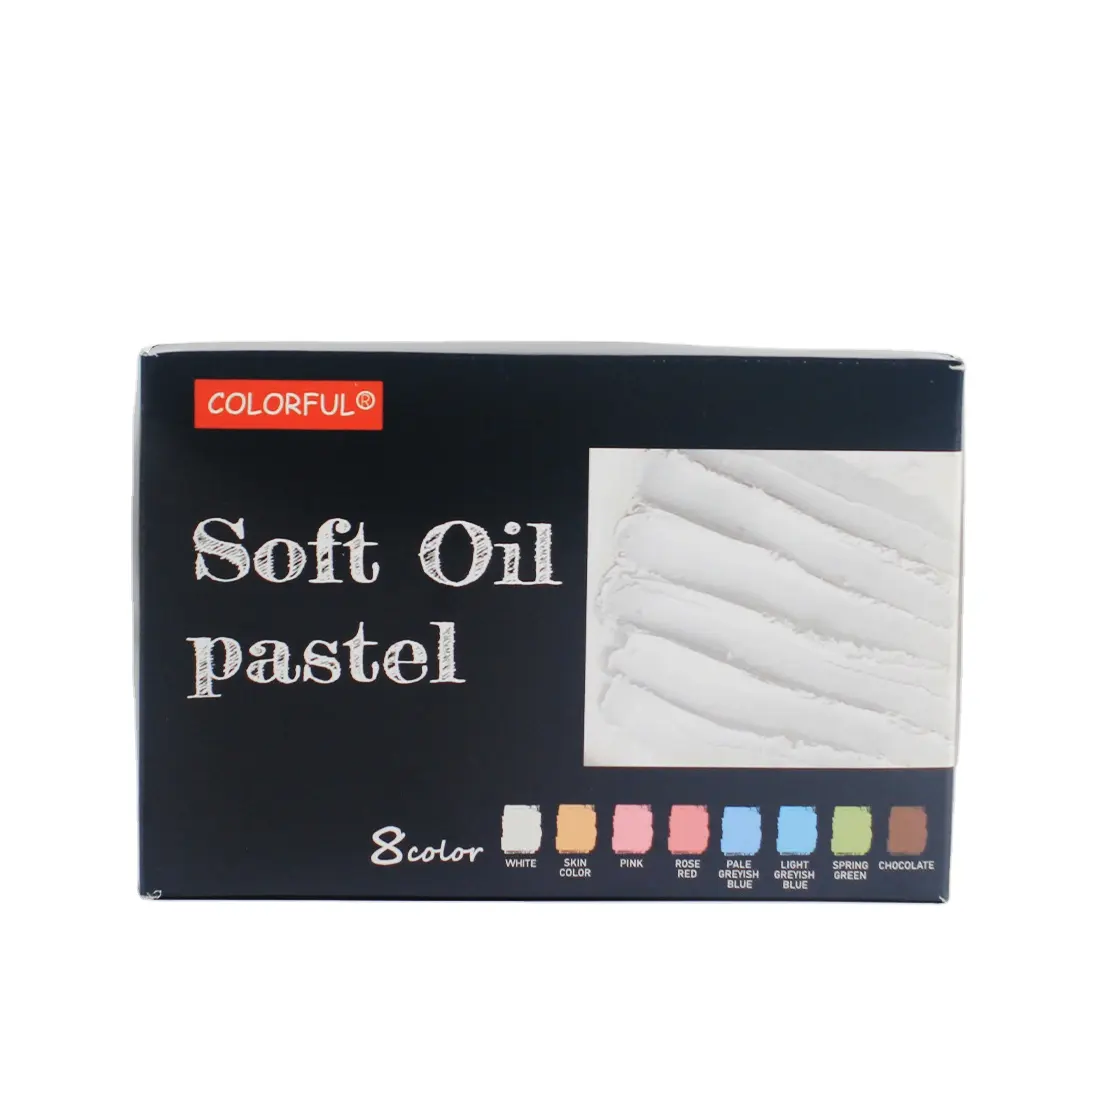 Colorful brand SOFT Oil pastel set of 8 colors